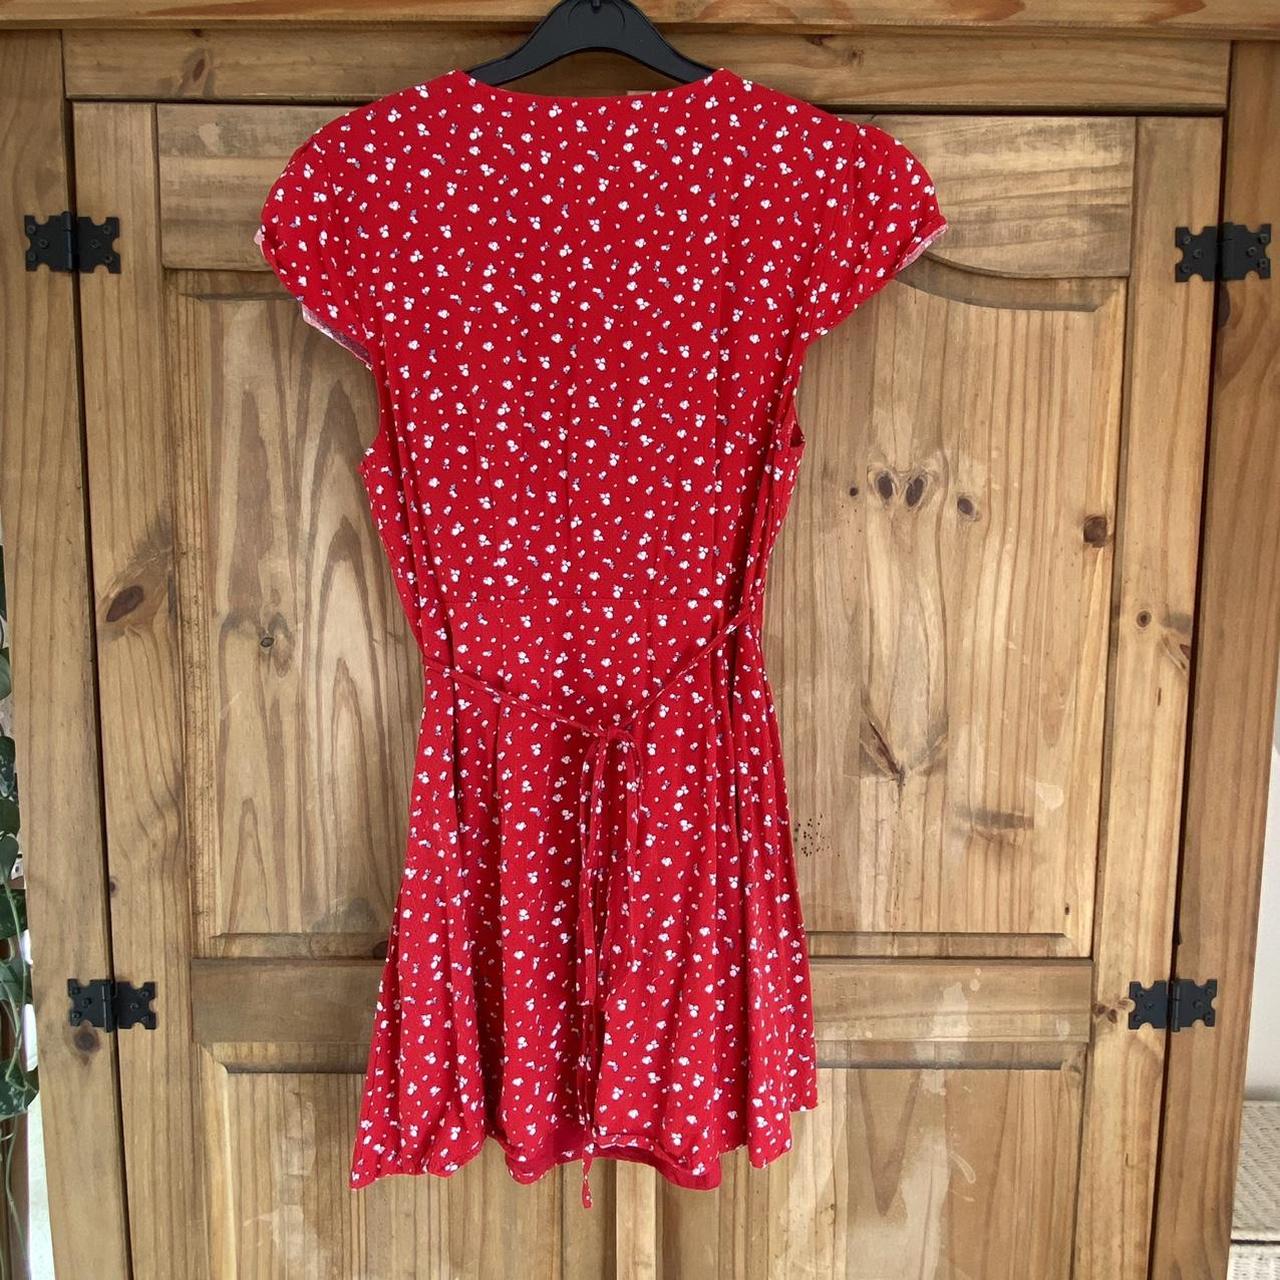 Glassons Women's Red and White Dress | Depop